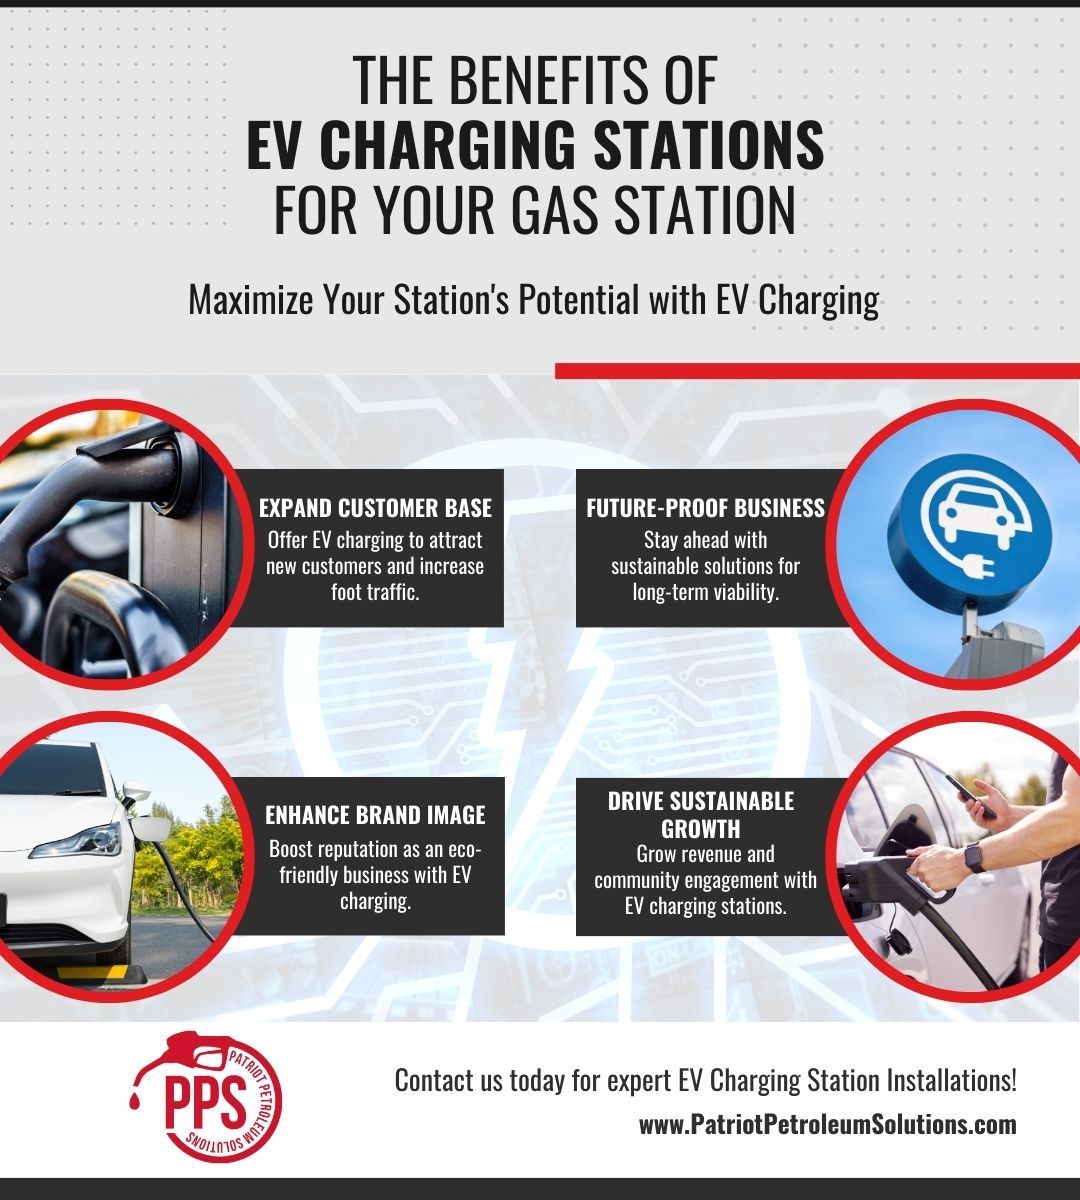 M38728 Infographic - The Benefits of EV Charging Stations for Your Gas Station.jpg